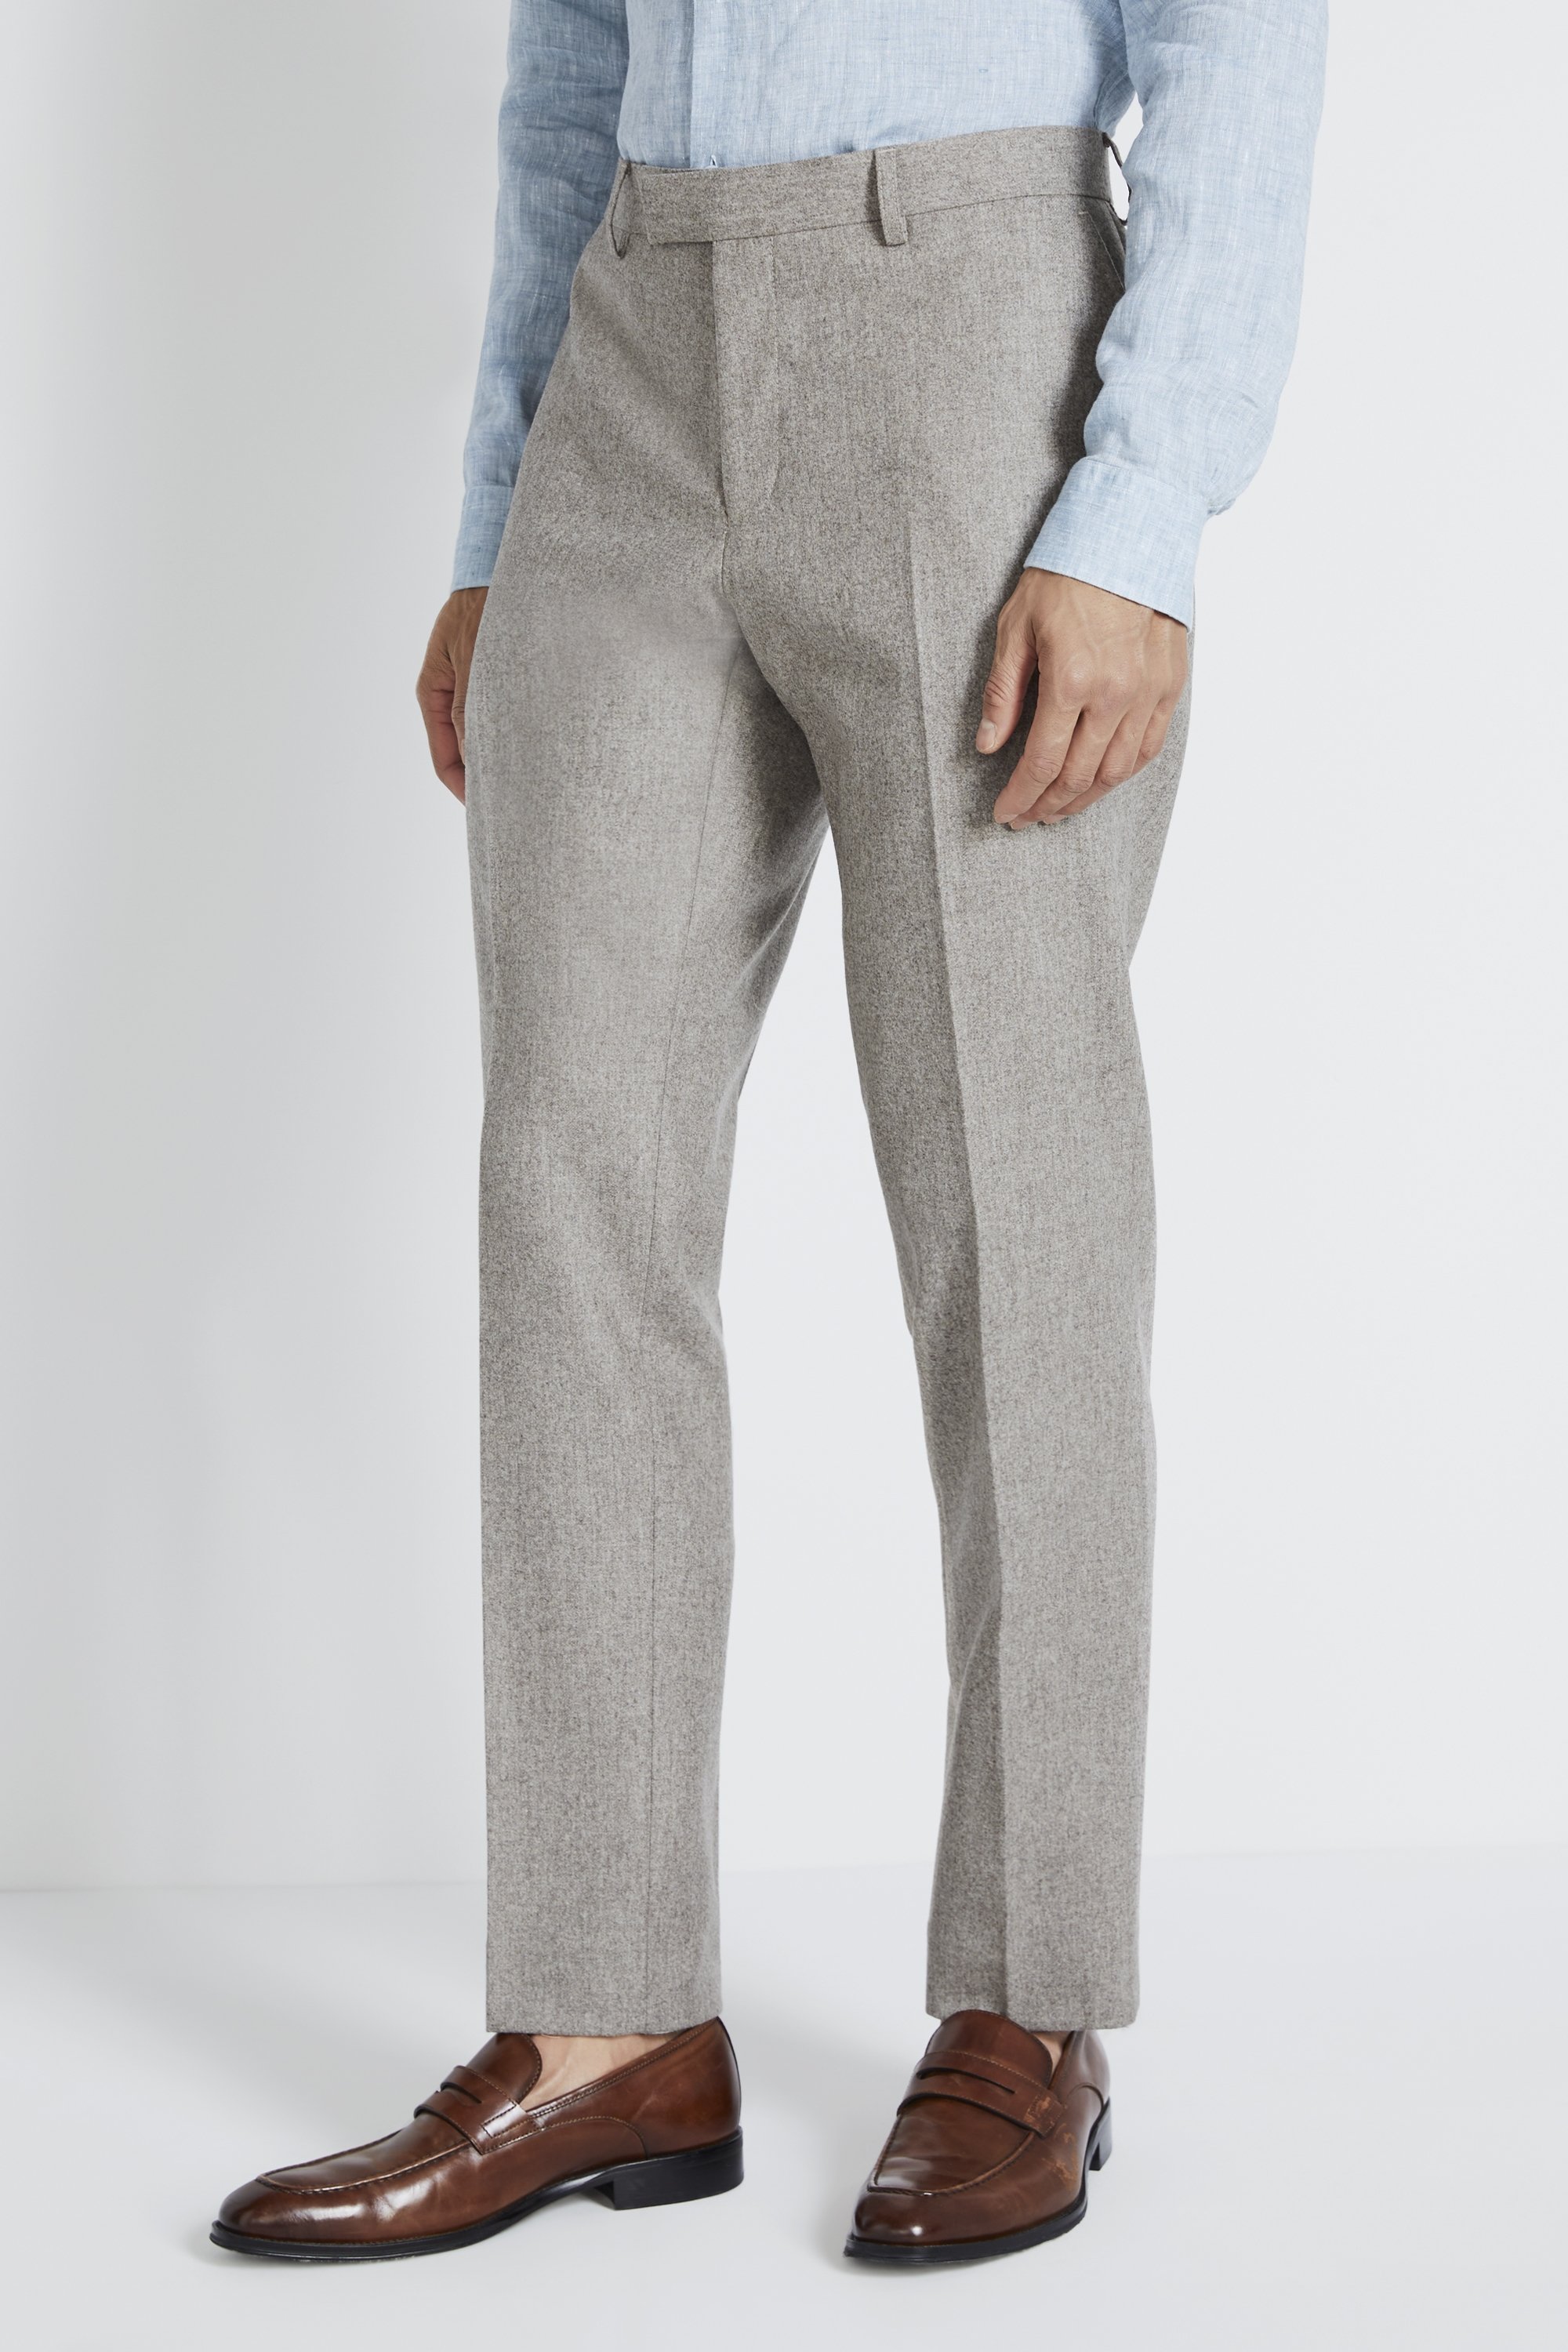 Buy Wool Trousers For Men Online In India